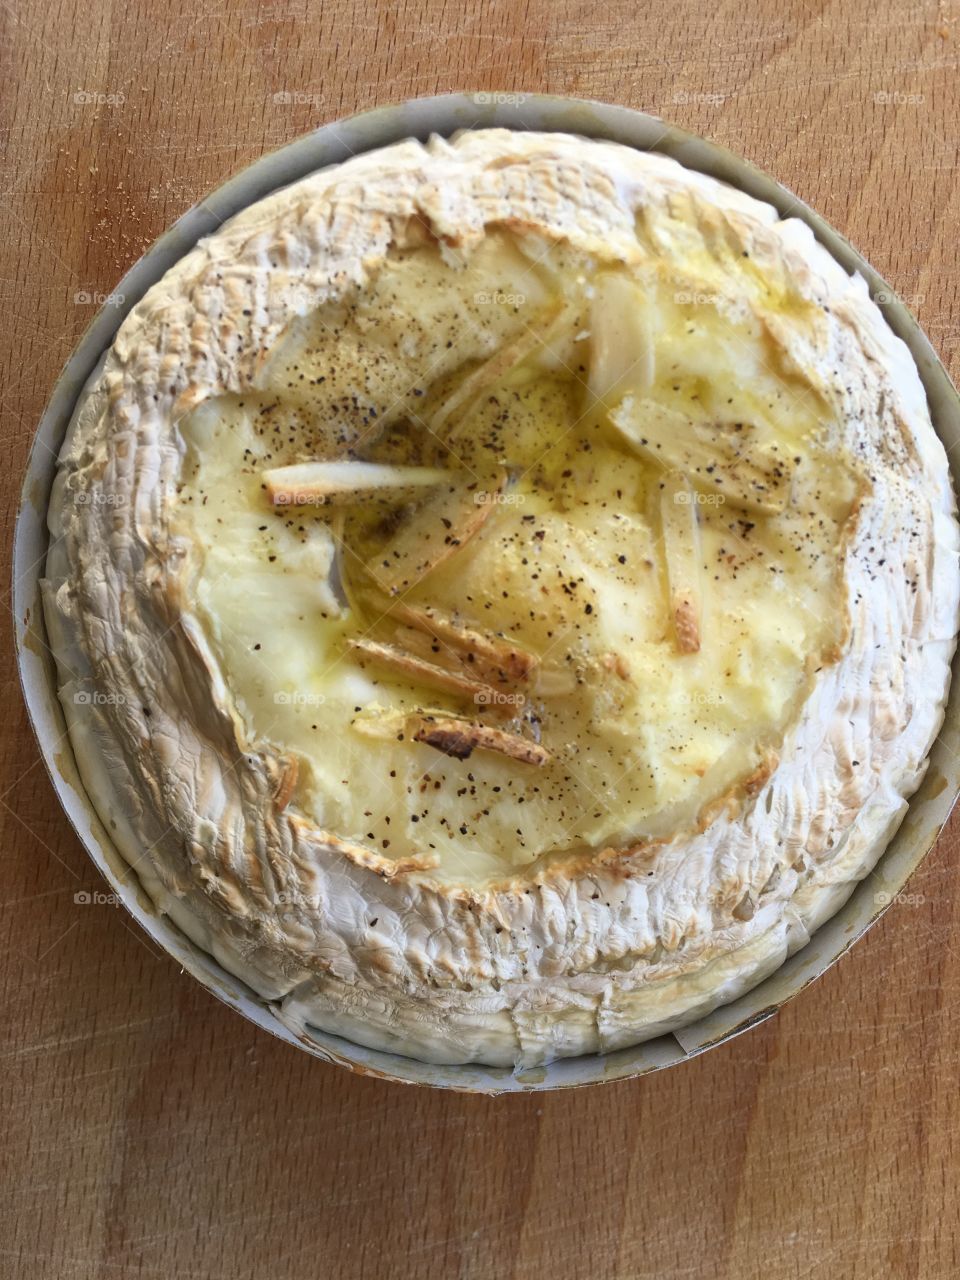 Baked Camembert with garlic